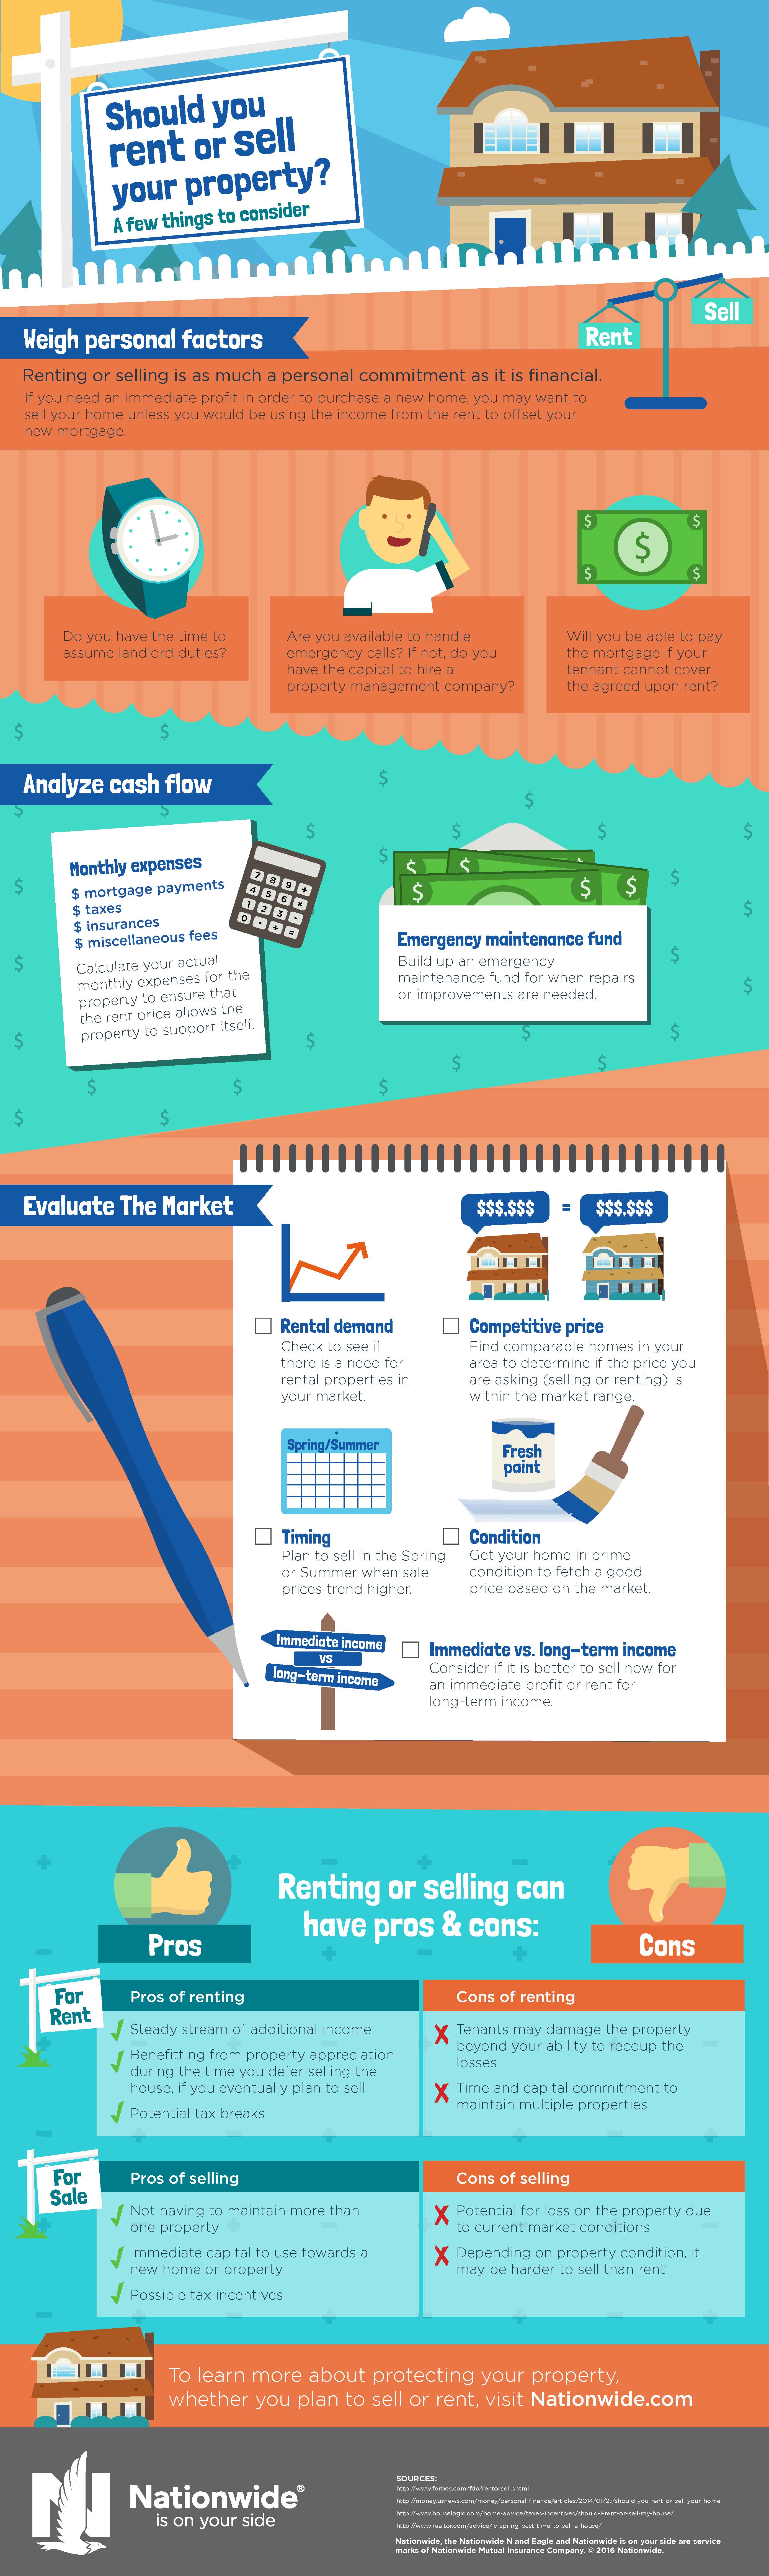 Should You Rent or Sell Your House? [Infographic]